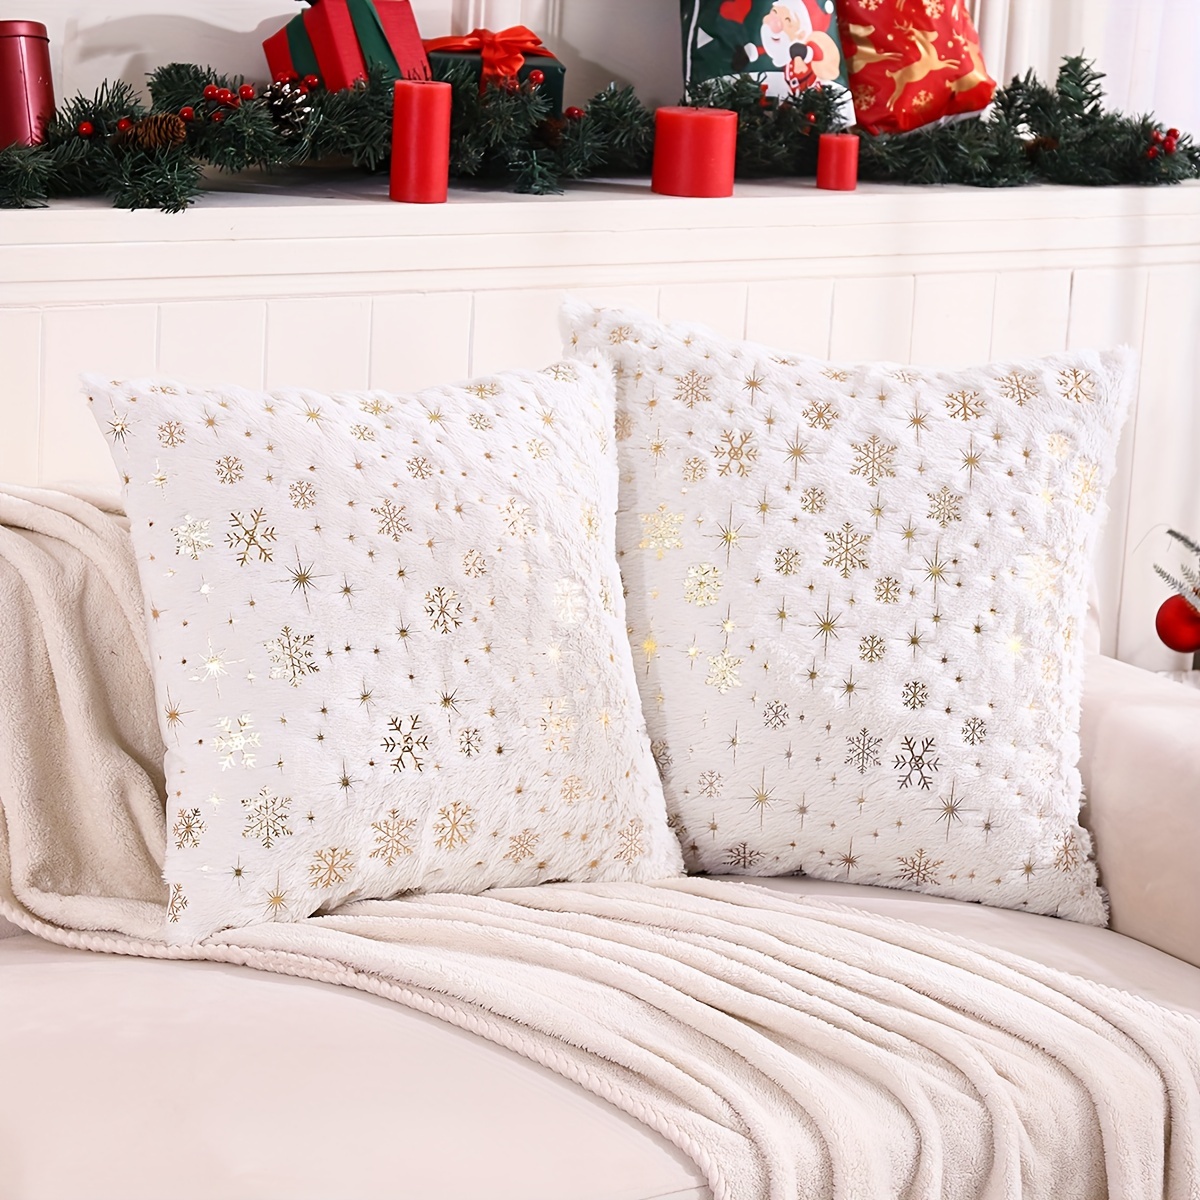 Partytalk 2pcs White Fur Throw Pillow Case Cushion Cover for Sofa Bedroom Car, 18 x 18 inch Christmas Pillow Covers Decorative New Luxury Series